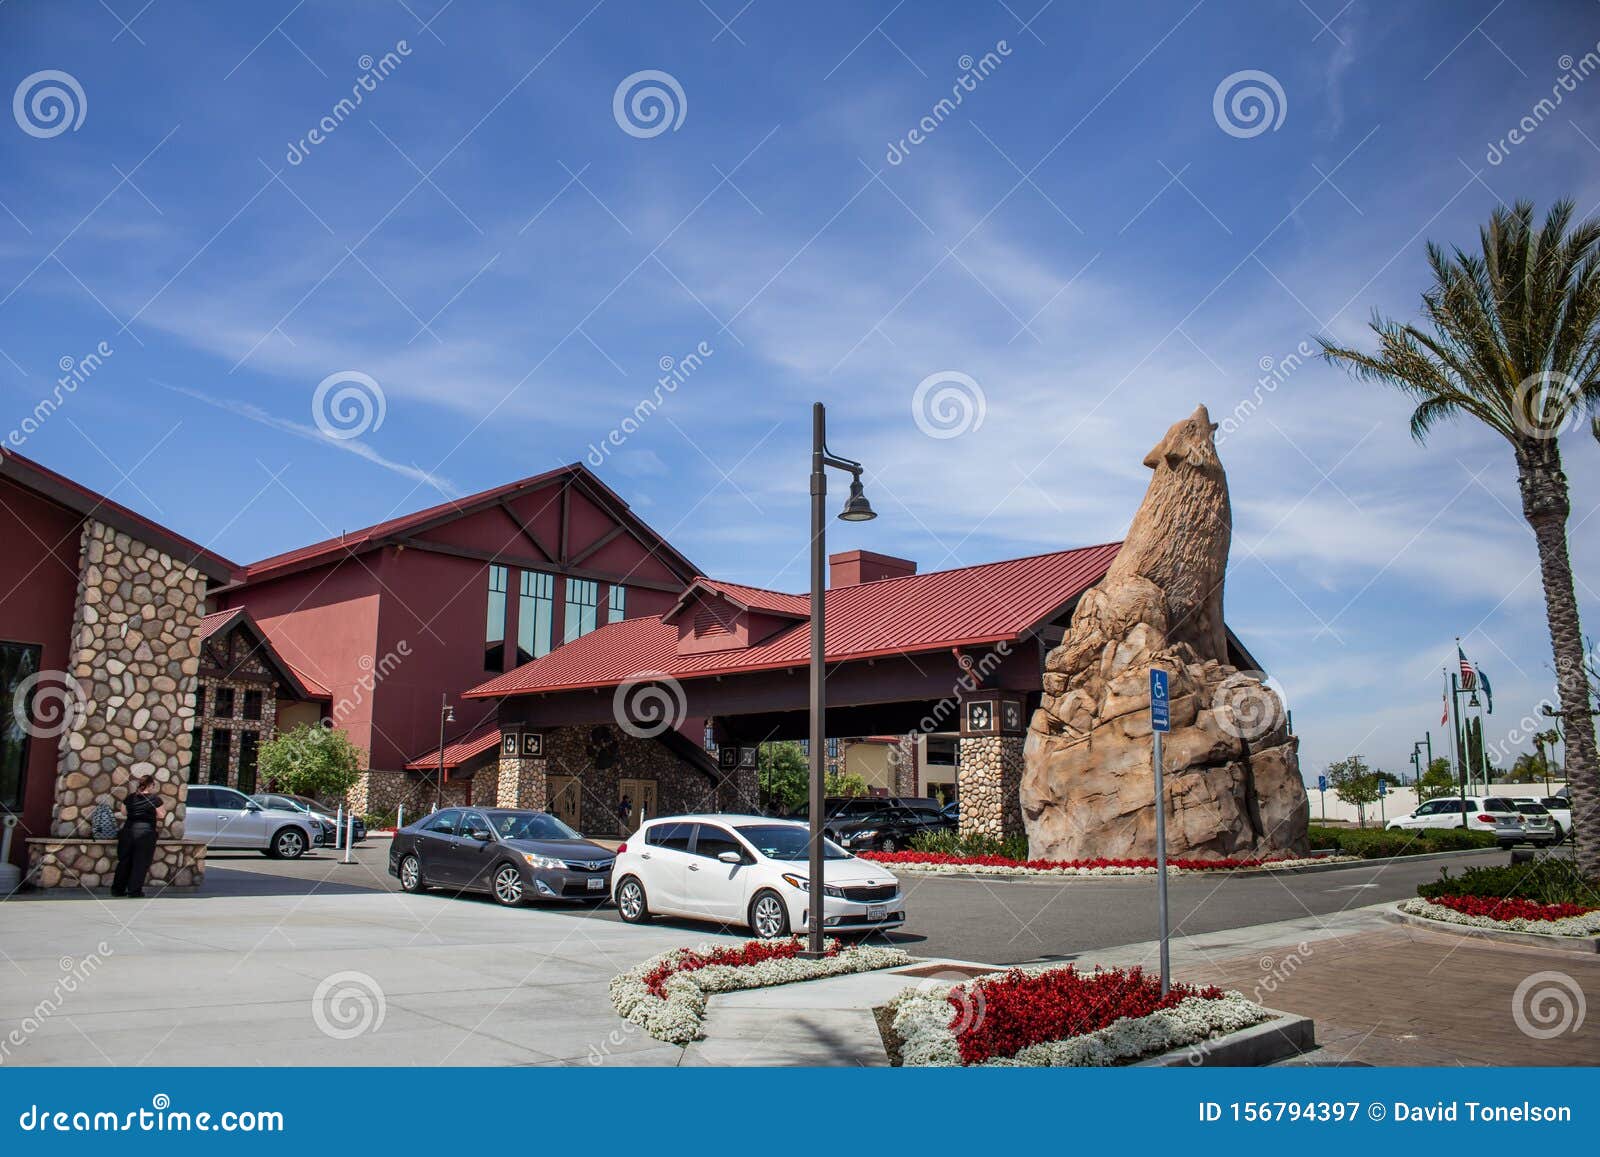 Great Wolf Lodge Building And Statue Editorial Photography Image